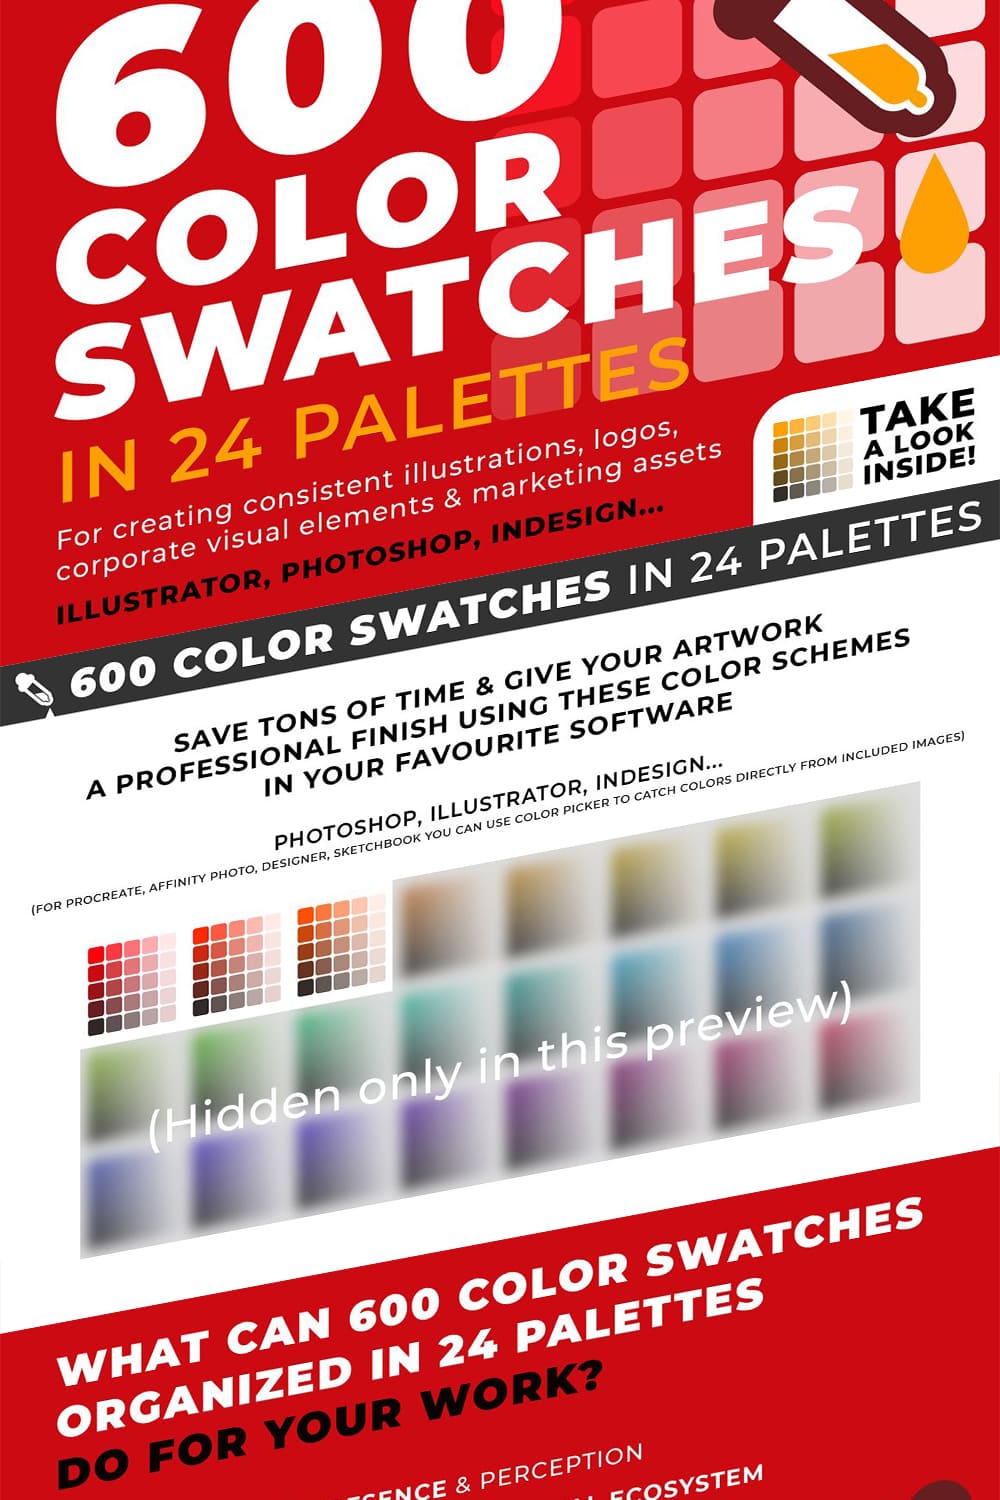 600 Color Swatches In 24 Palettes - "Illustrator, Photoshop, Indesign".